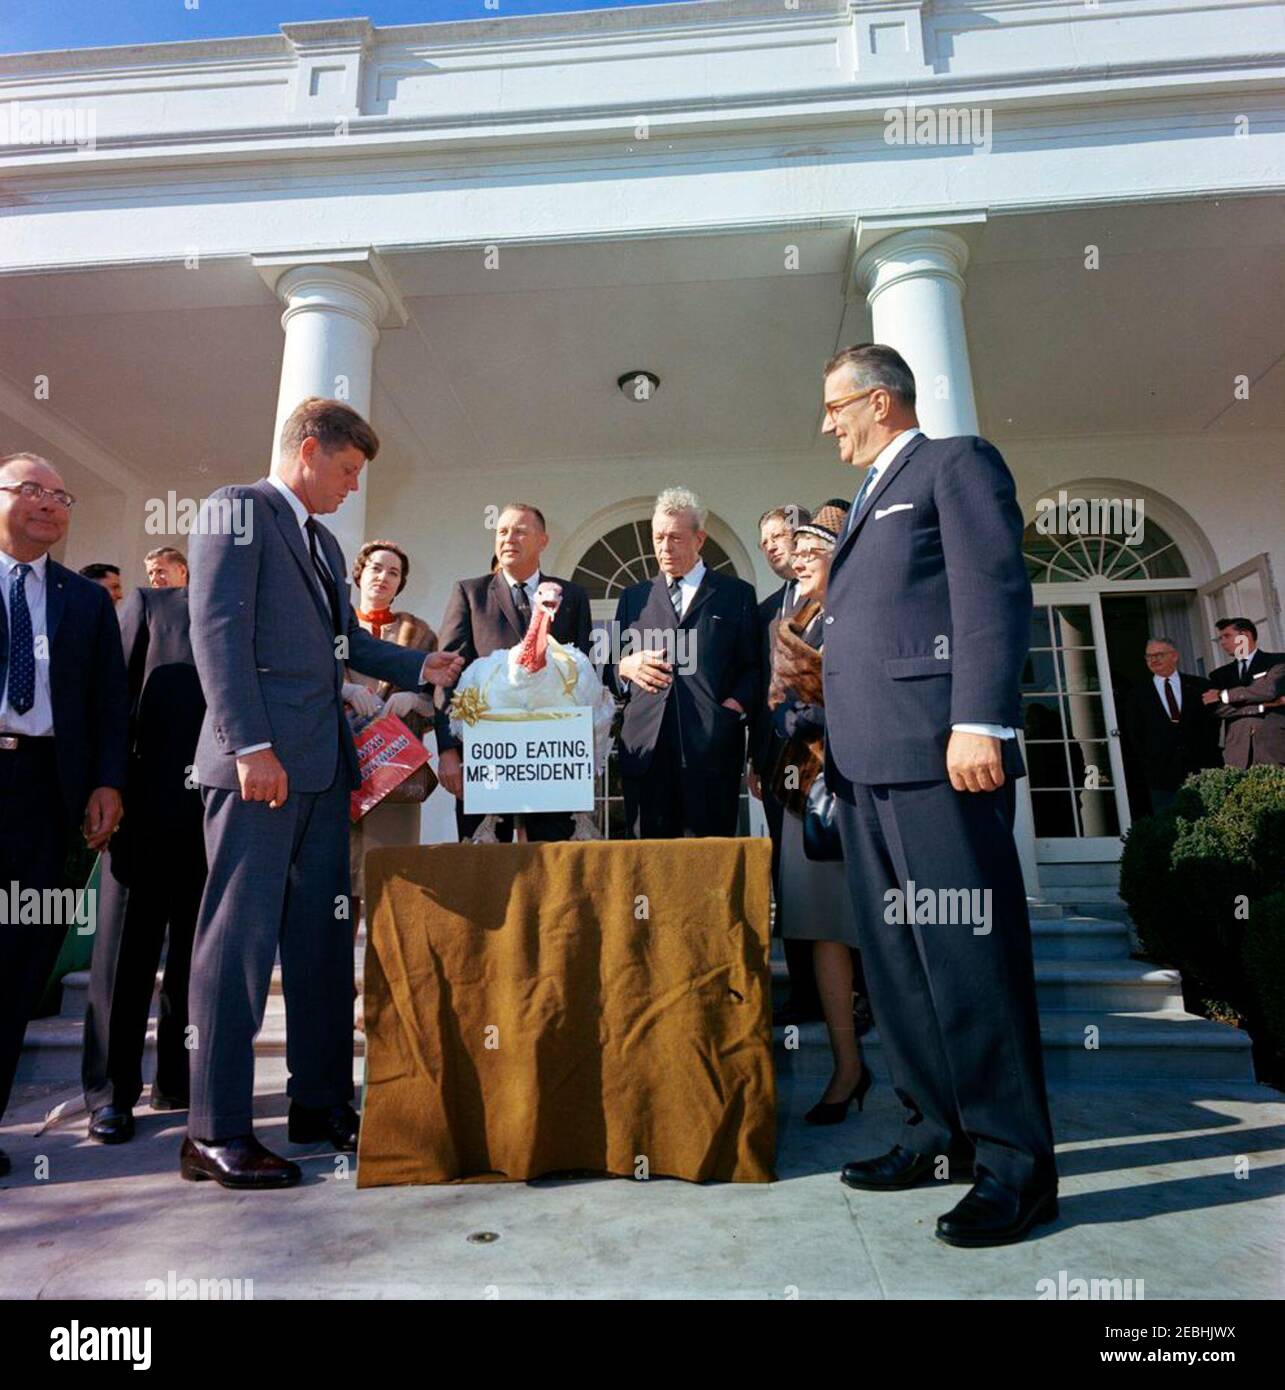 Presentation of a Thanksgiving Turkey to President Kennedy, 10:00AM. President John F. Kennedy receives a turkey presented to him for Thanksgiving by the National Turkey Federation and the Poultry and Egg National Board; President Kennedy pardoned the turkey. Left to right: Vice President of the National Turkey Federation, Morris G. Smith; Administrative Assistant to the President, Mike Manatos (partially hidden); two unidentified persons; President Kennedy; Mrs. Robert M. McPherrin; President of the National Turkey Federation, Robert M. McPherrin; Senator Everett Dirksen (Illinois); Executive Stock Photo